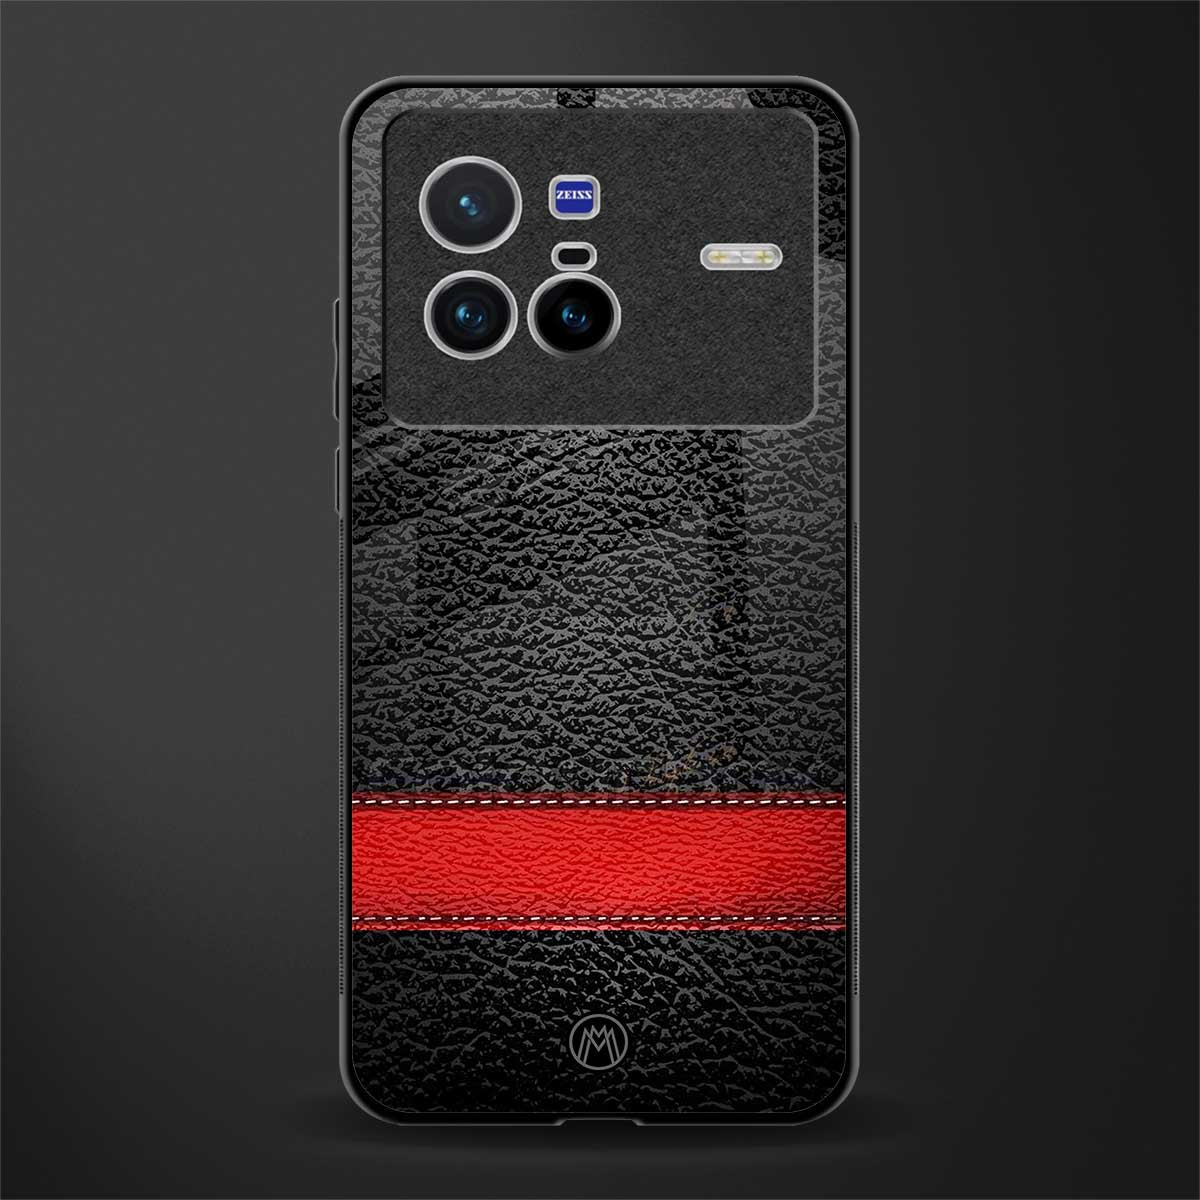 reaper's touch glass case for vivo x80 image